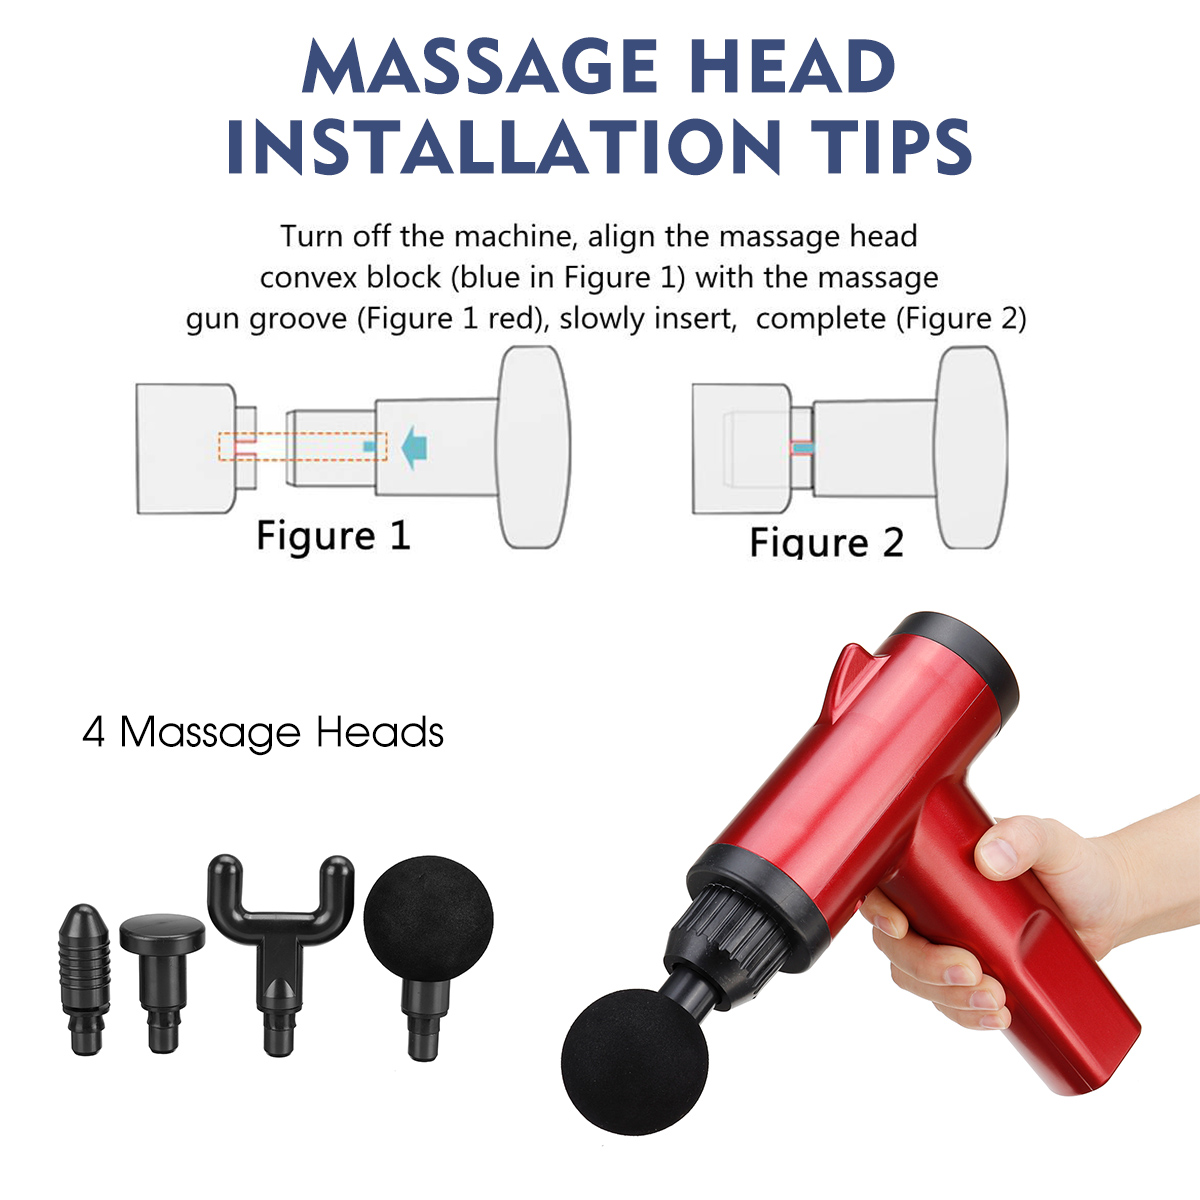 6-Gears-3200RMIN-Electric-Percussion-Massager-Muscle-Relaxation-Therapy-Massage-Guns-W-4-Massage-Hea-1773063-6